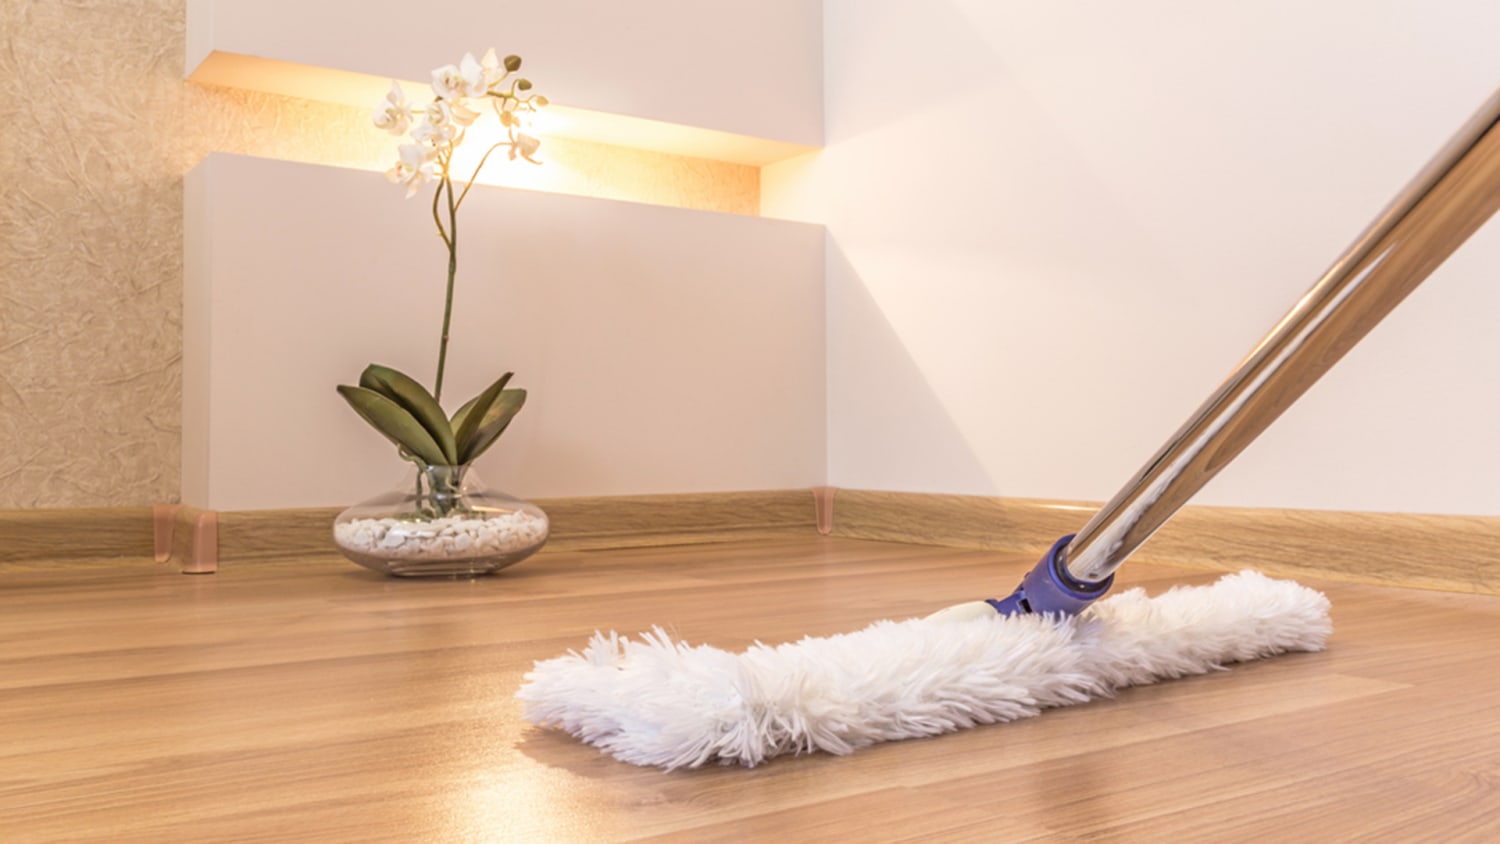 How To Clean Hardwood Floors The Right Way, Carpet And Hardwood Floor Cleaner